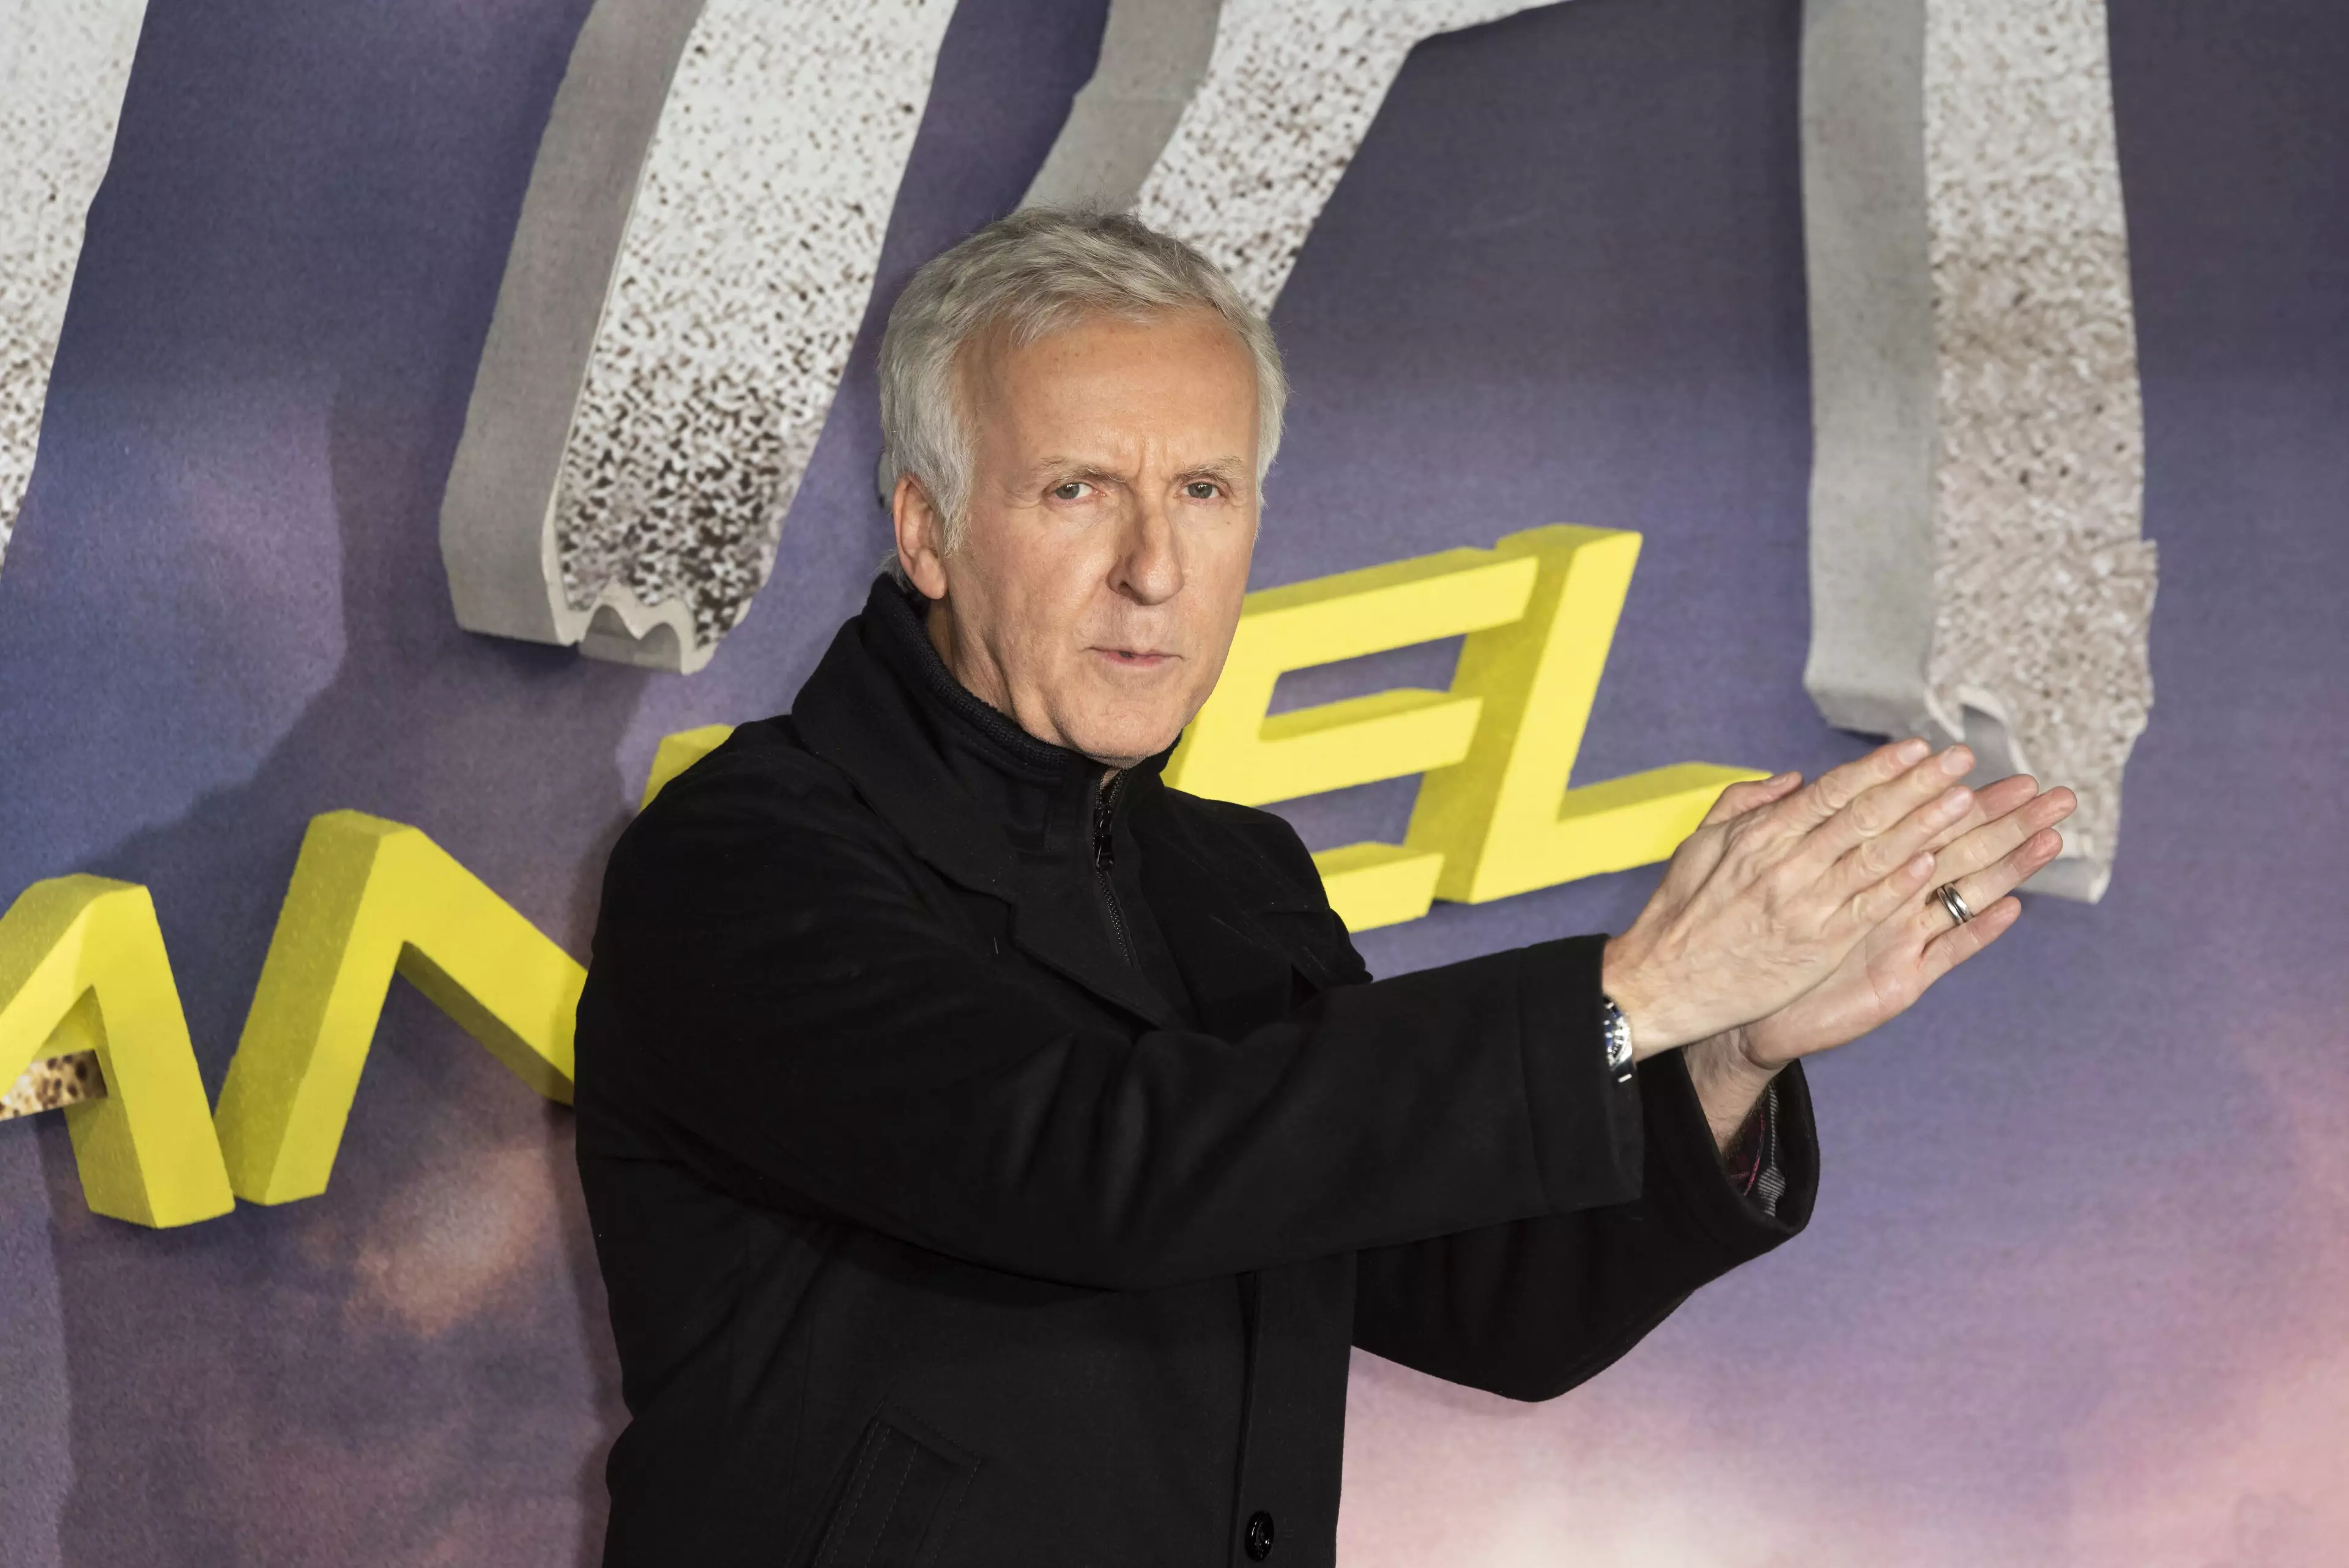 James Cameron is hopeful that Avatar 2 will still be ready in time for its 2021 release date.